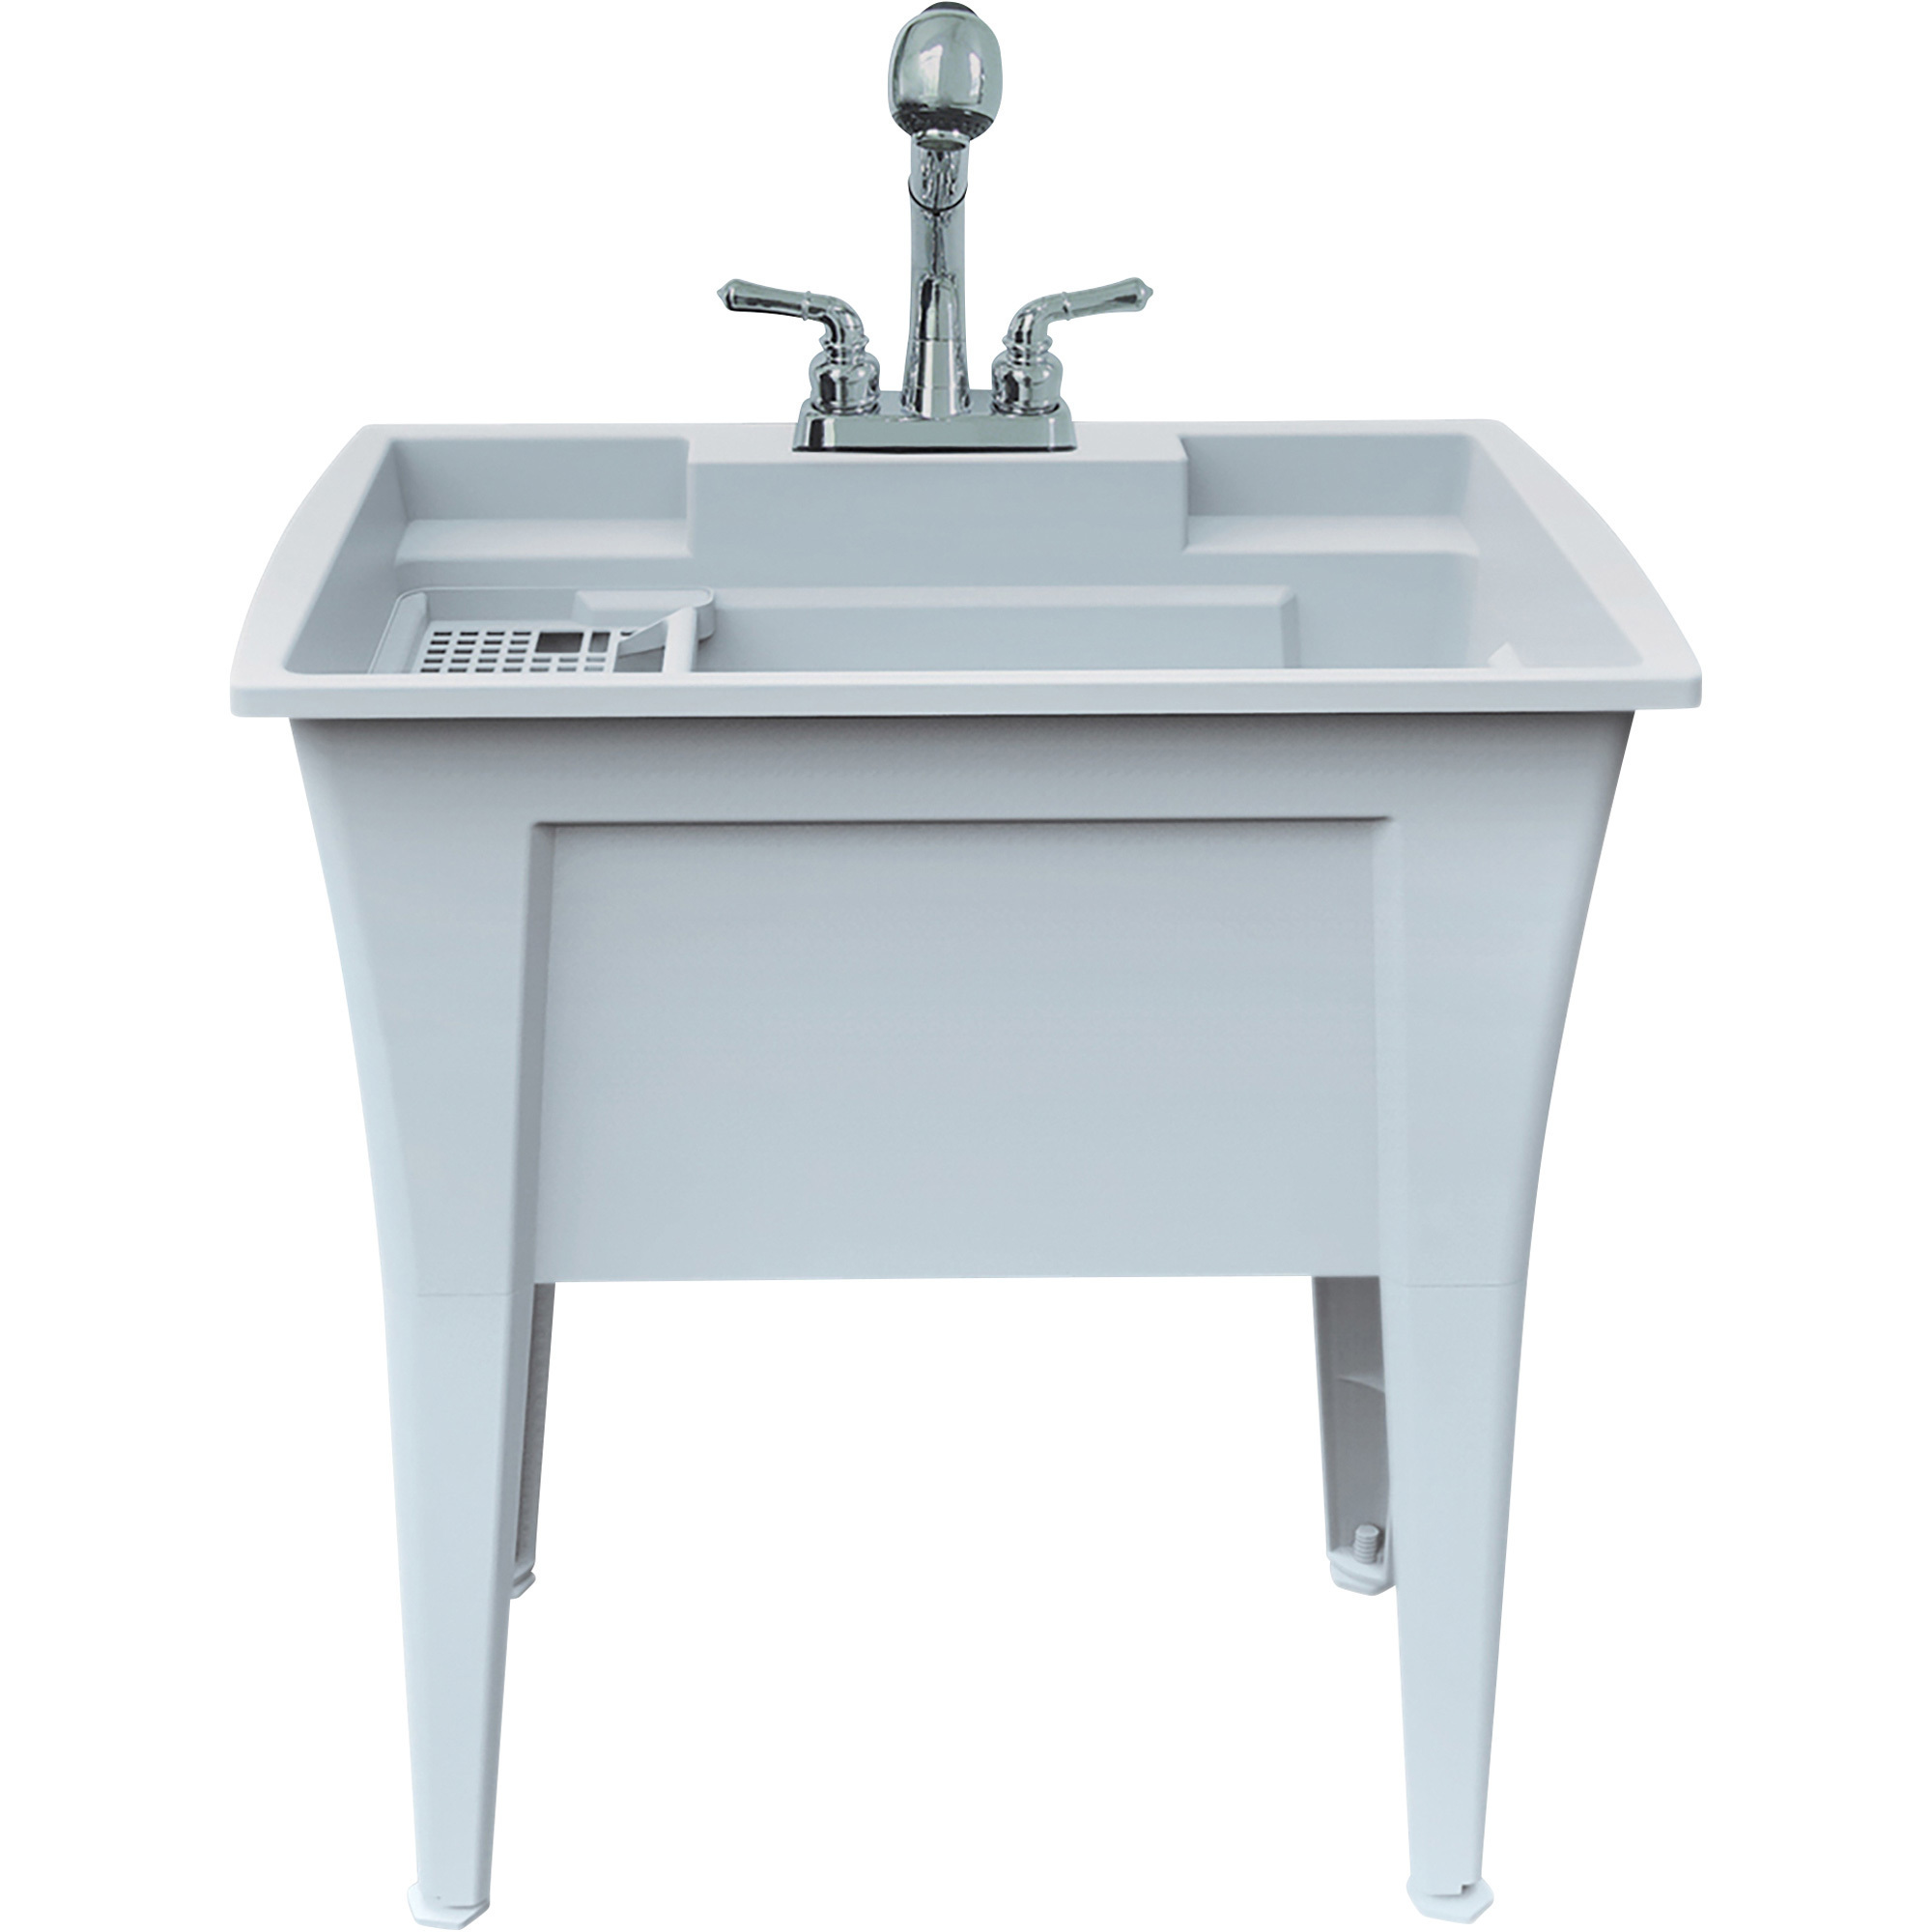 Rugged Tub Garage and Laundry Sink with Pull-Out Faucet â 32Inch W, White with Gray Specs, Polypropylene, Model G32GK1